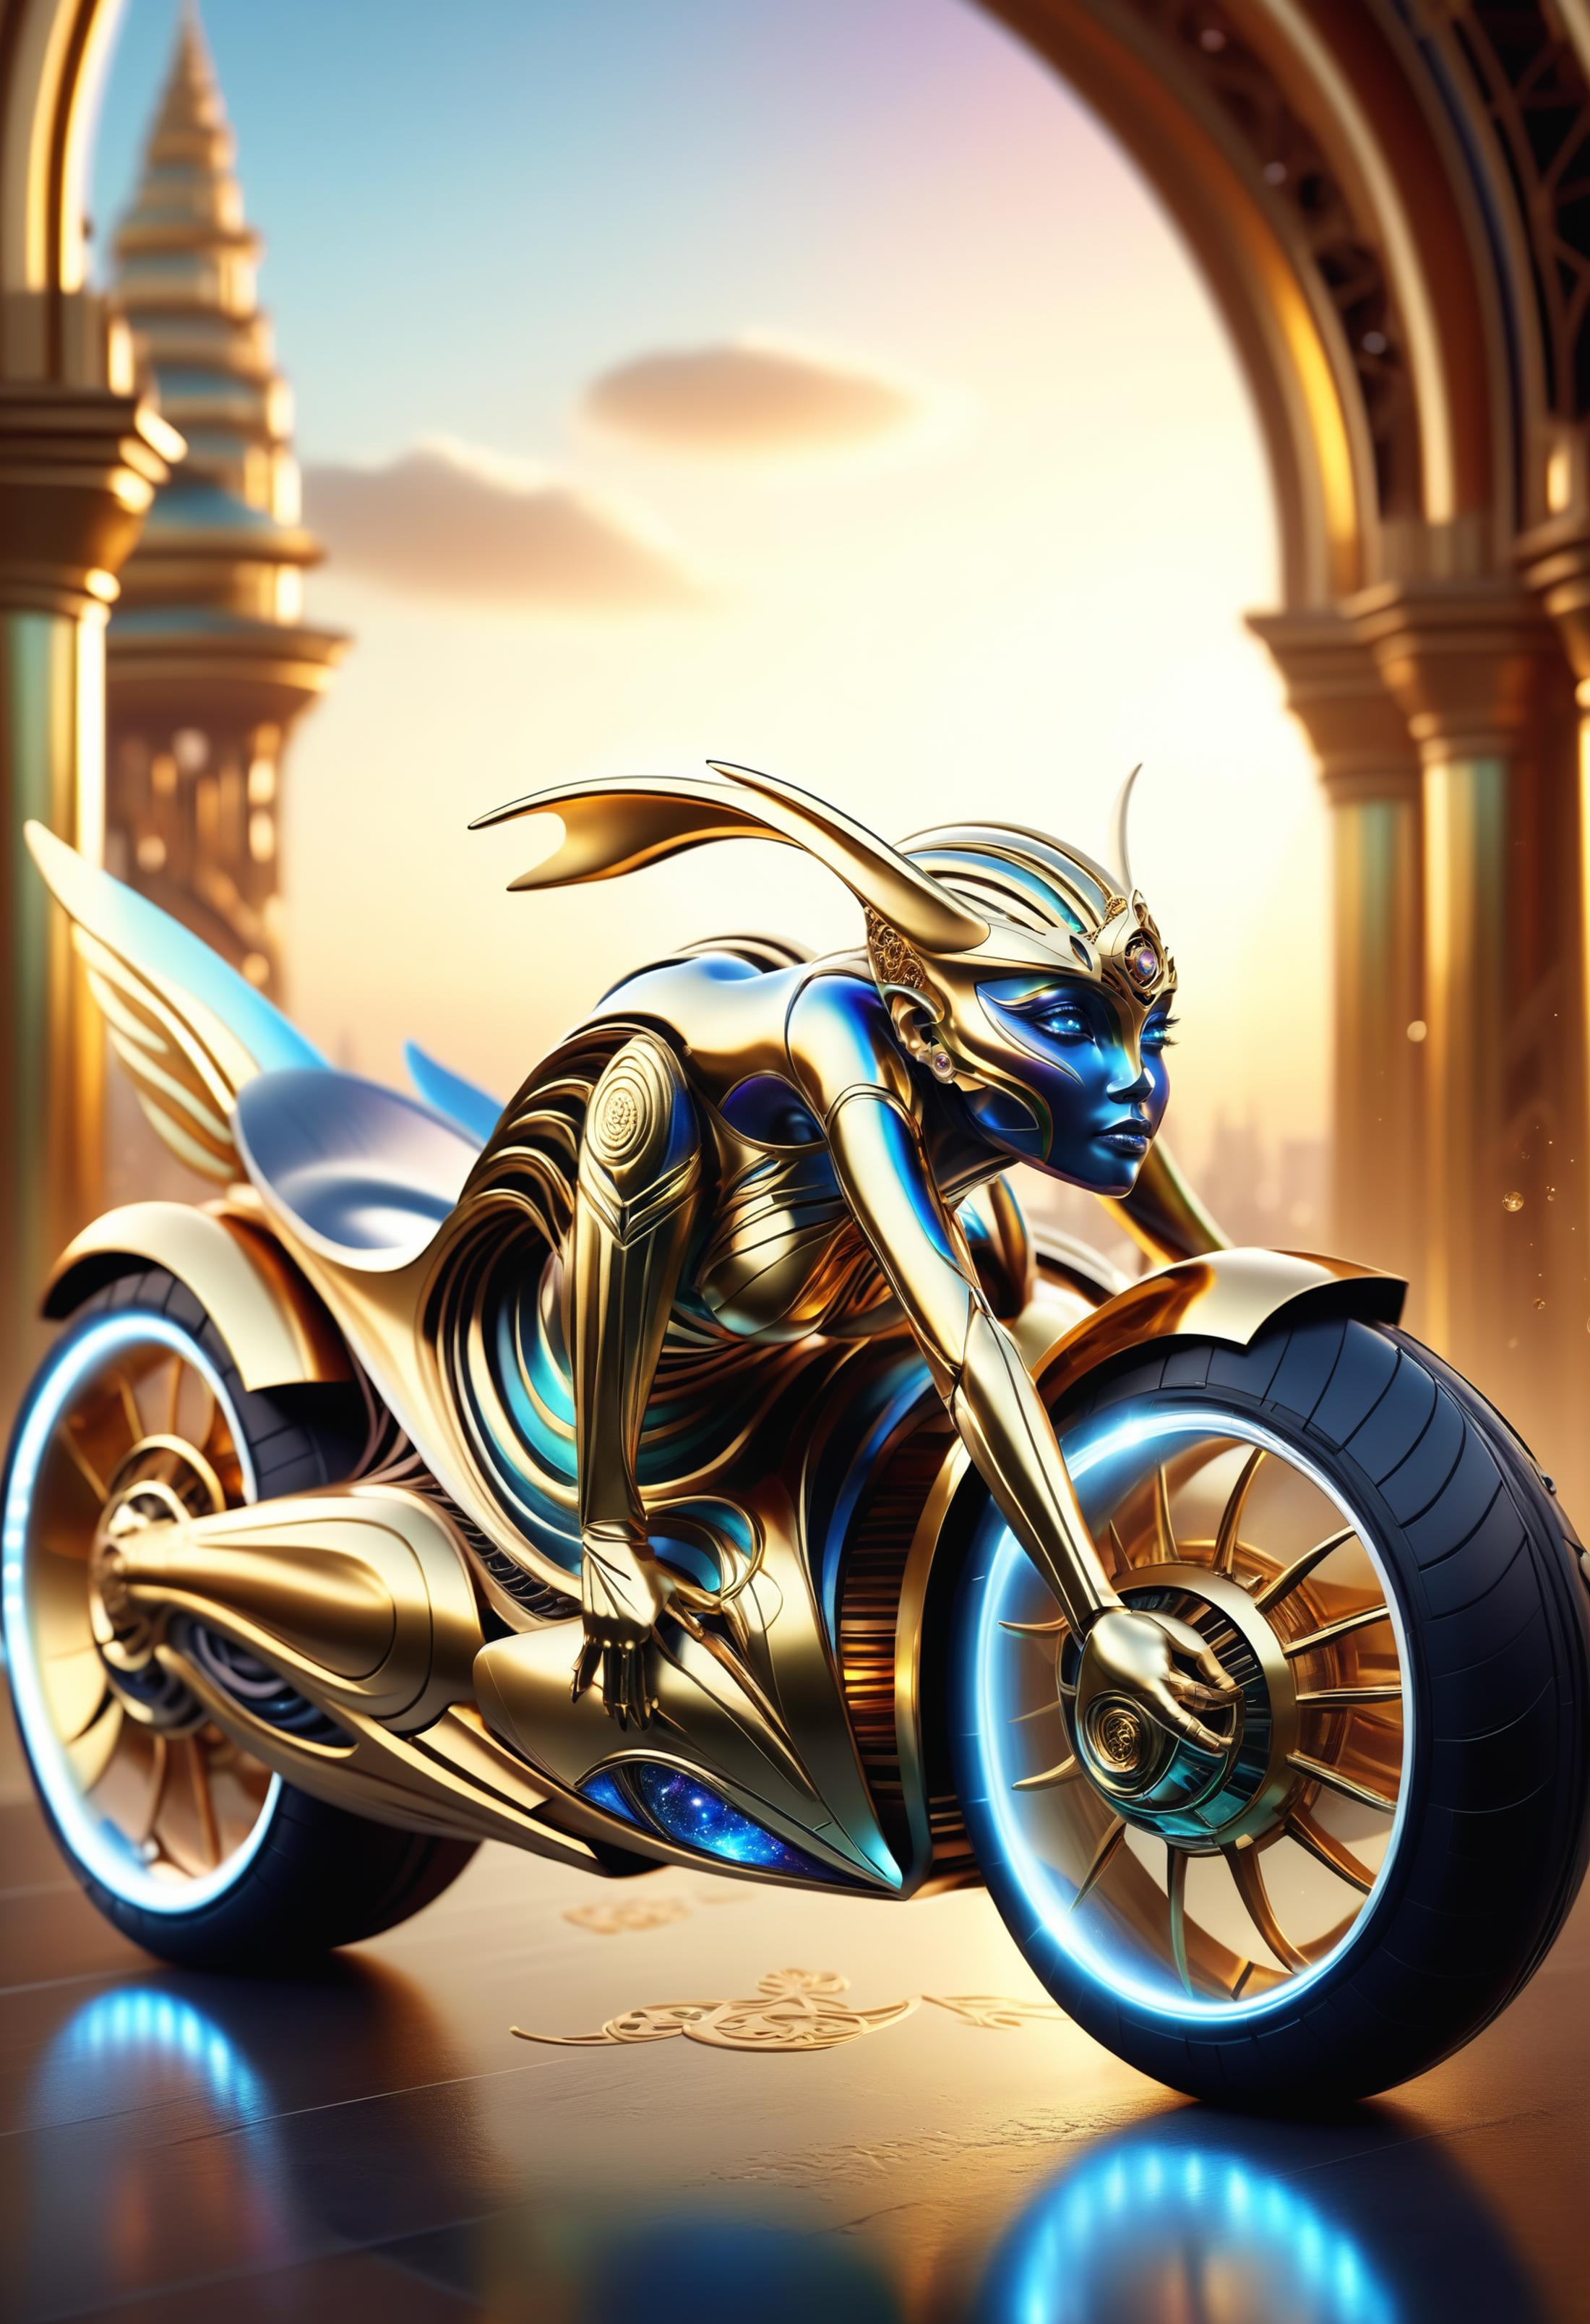 A Gold and Blue Motorcycle with a Woman Rider in a Fantasy Setting